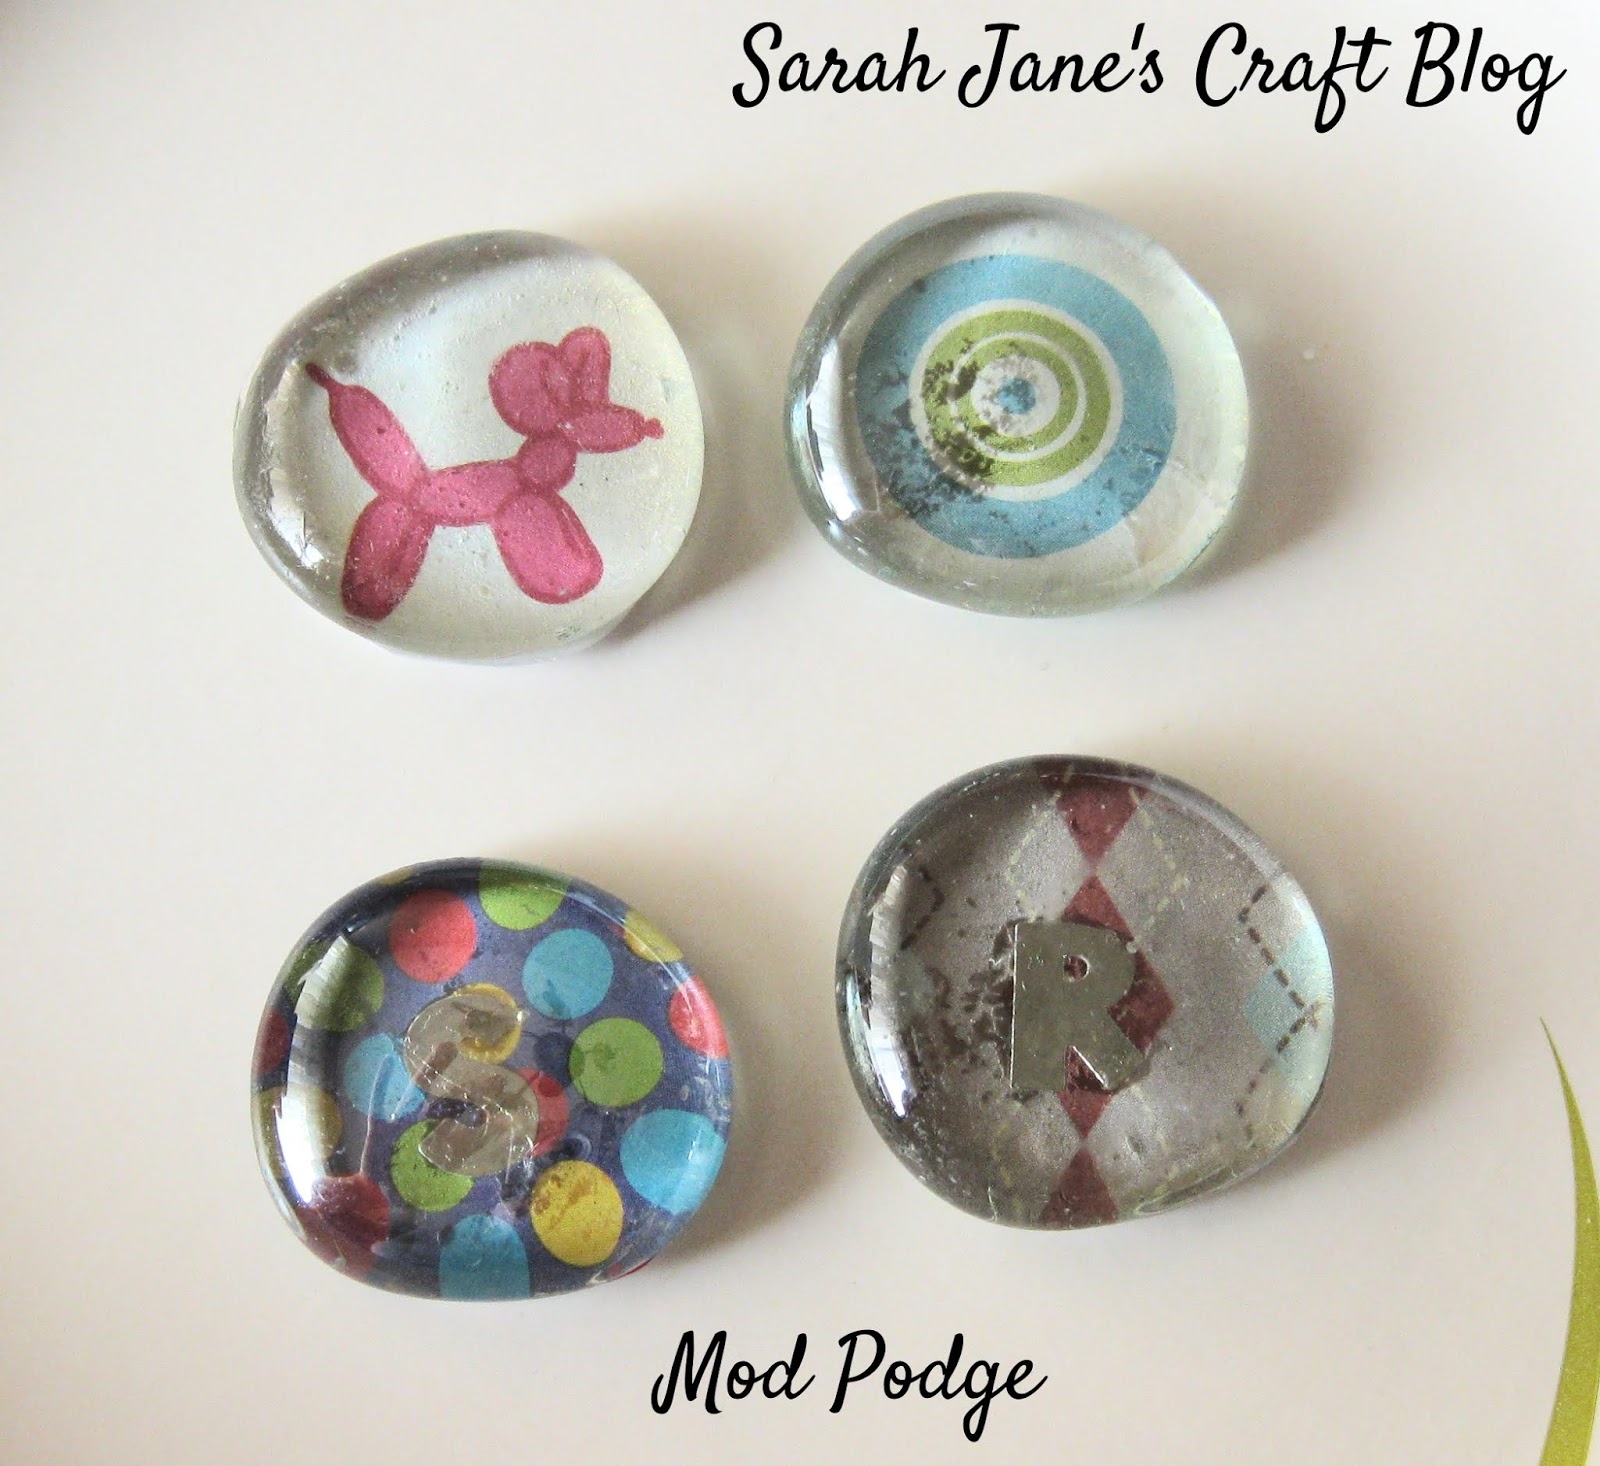 How to Label Glass Using Mod Podge - Courtney's Sweets